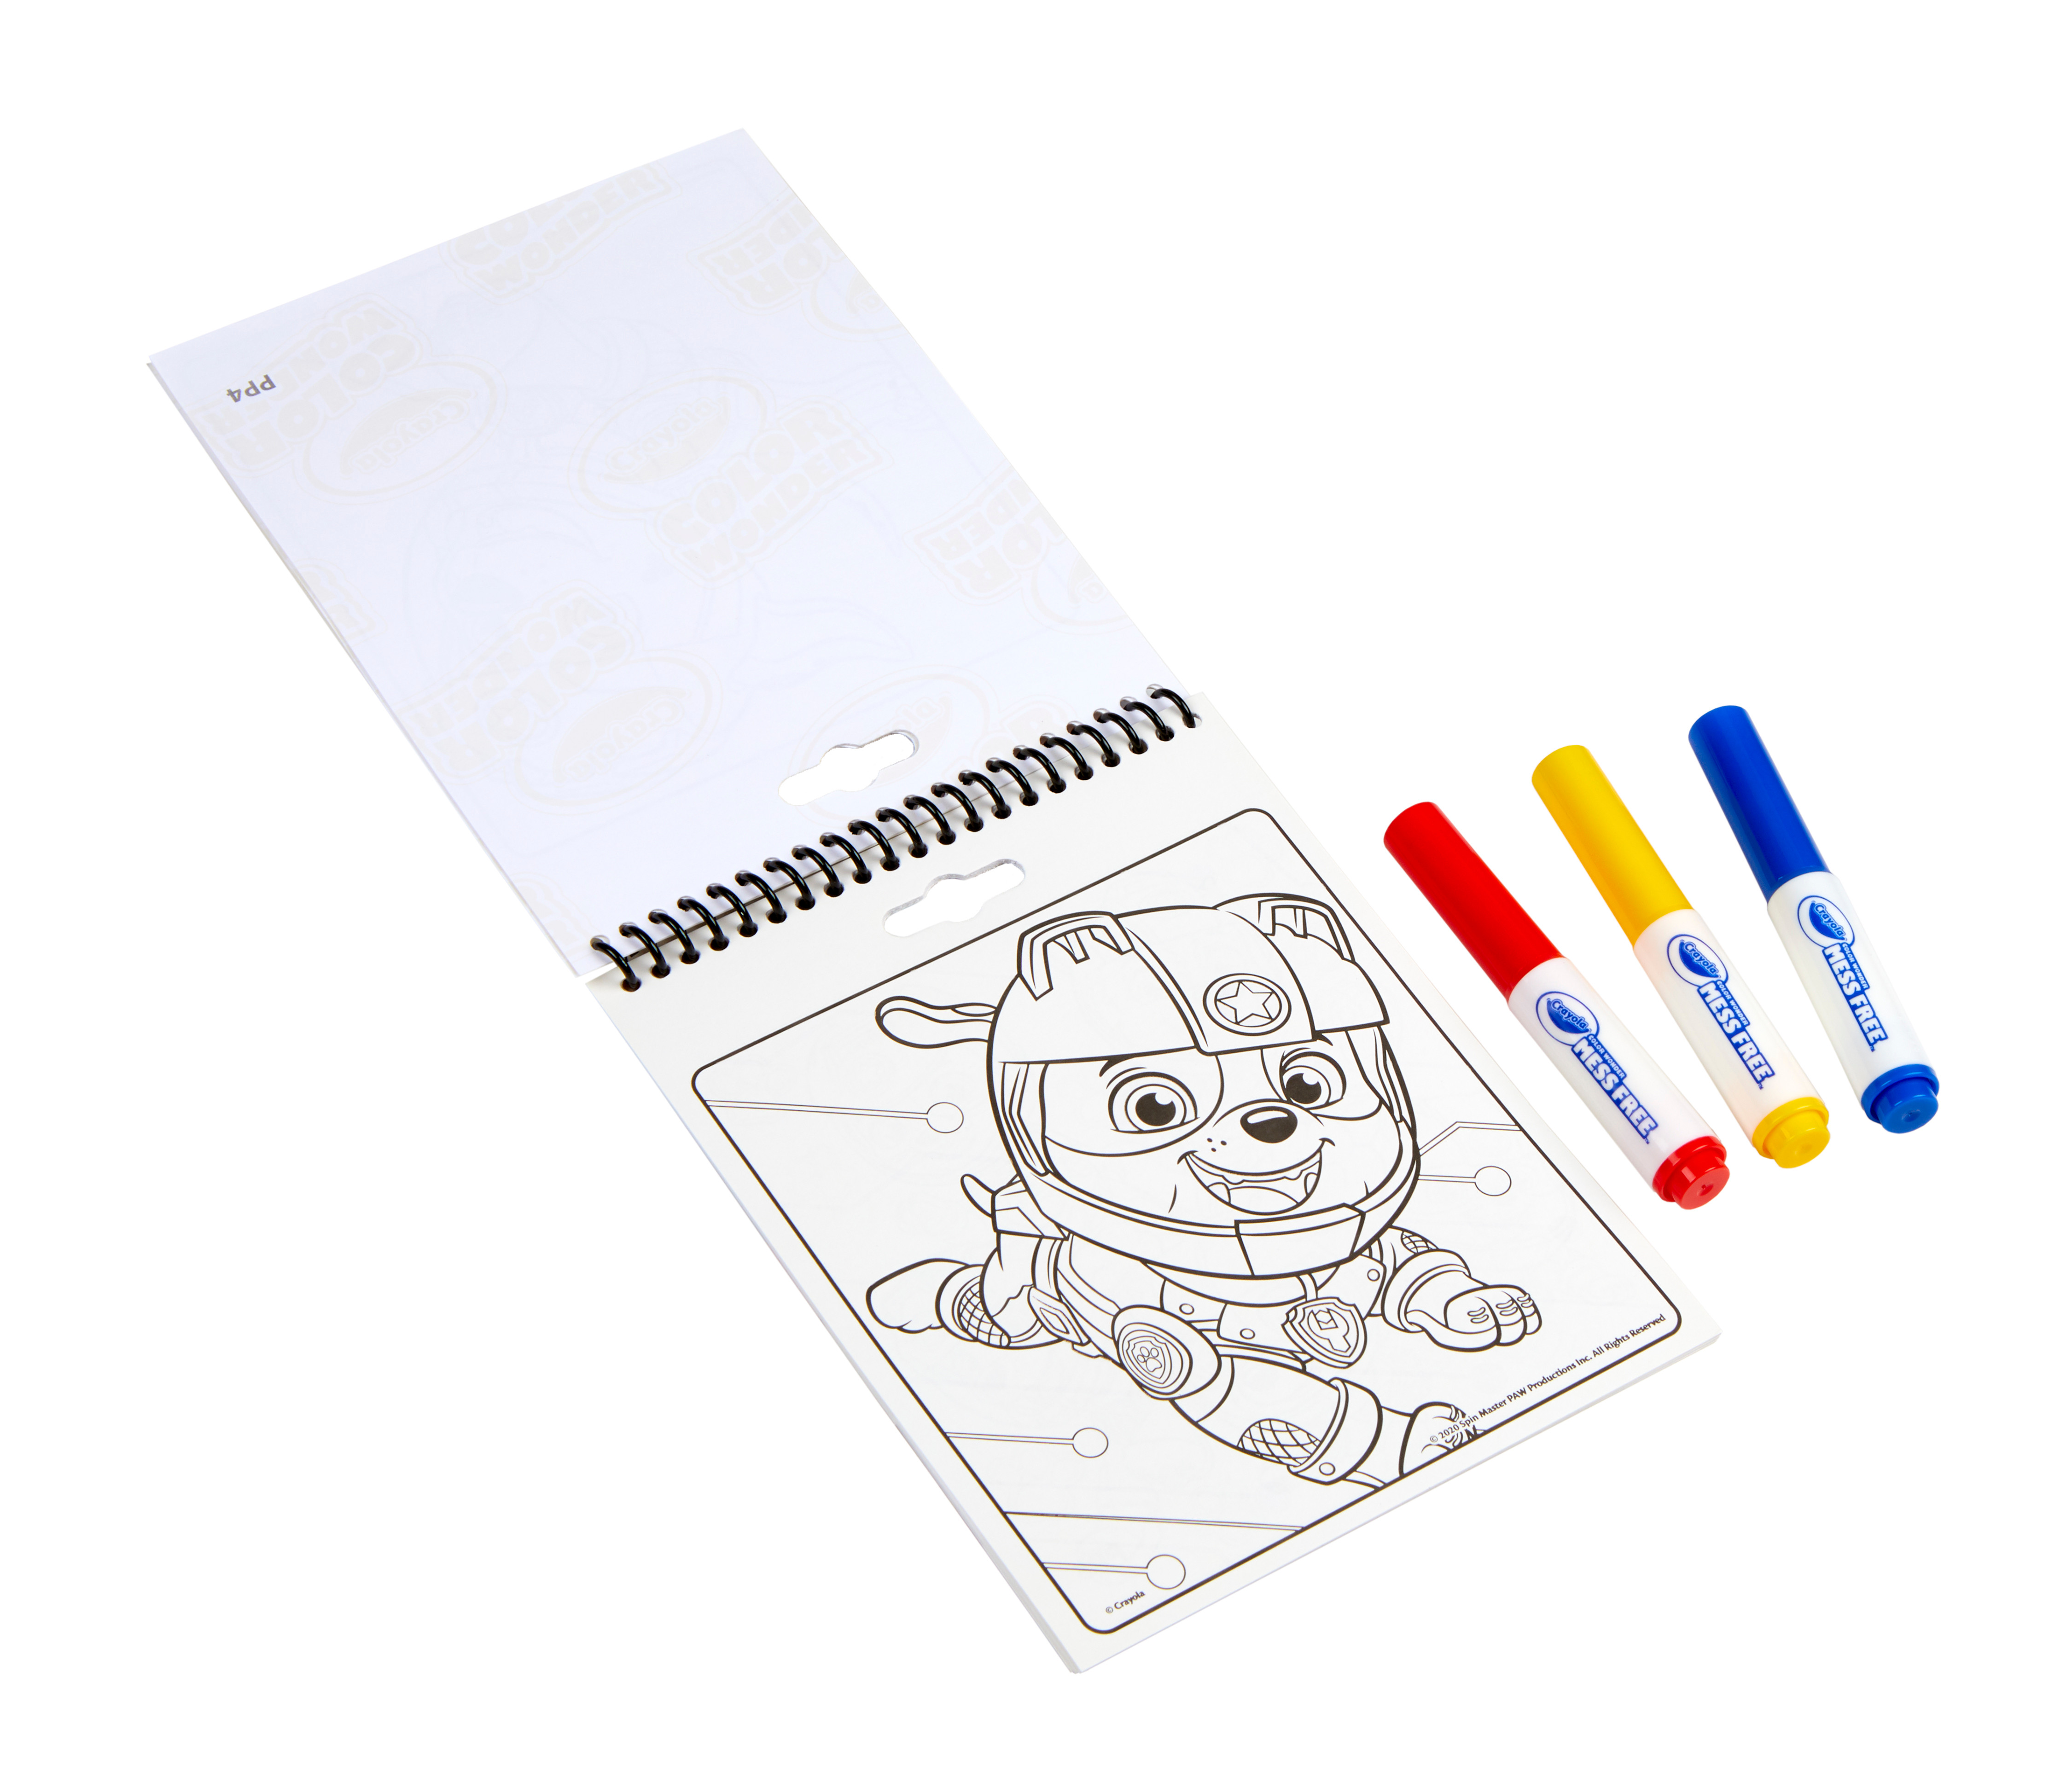 Crayola Color Wonder Paw Patrol Coloring Book & Activity Pad, 16 Pages, Unisex Child - image 4 of 7